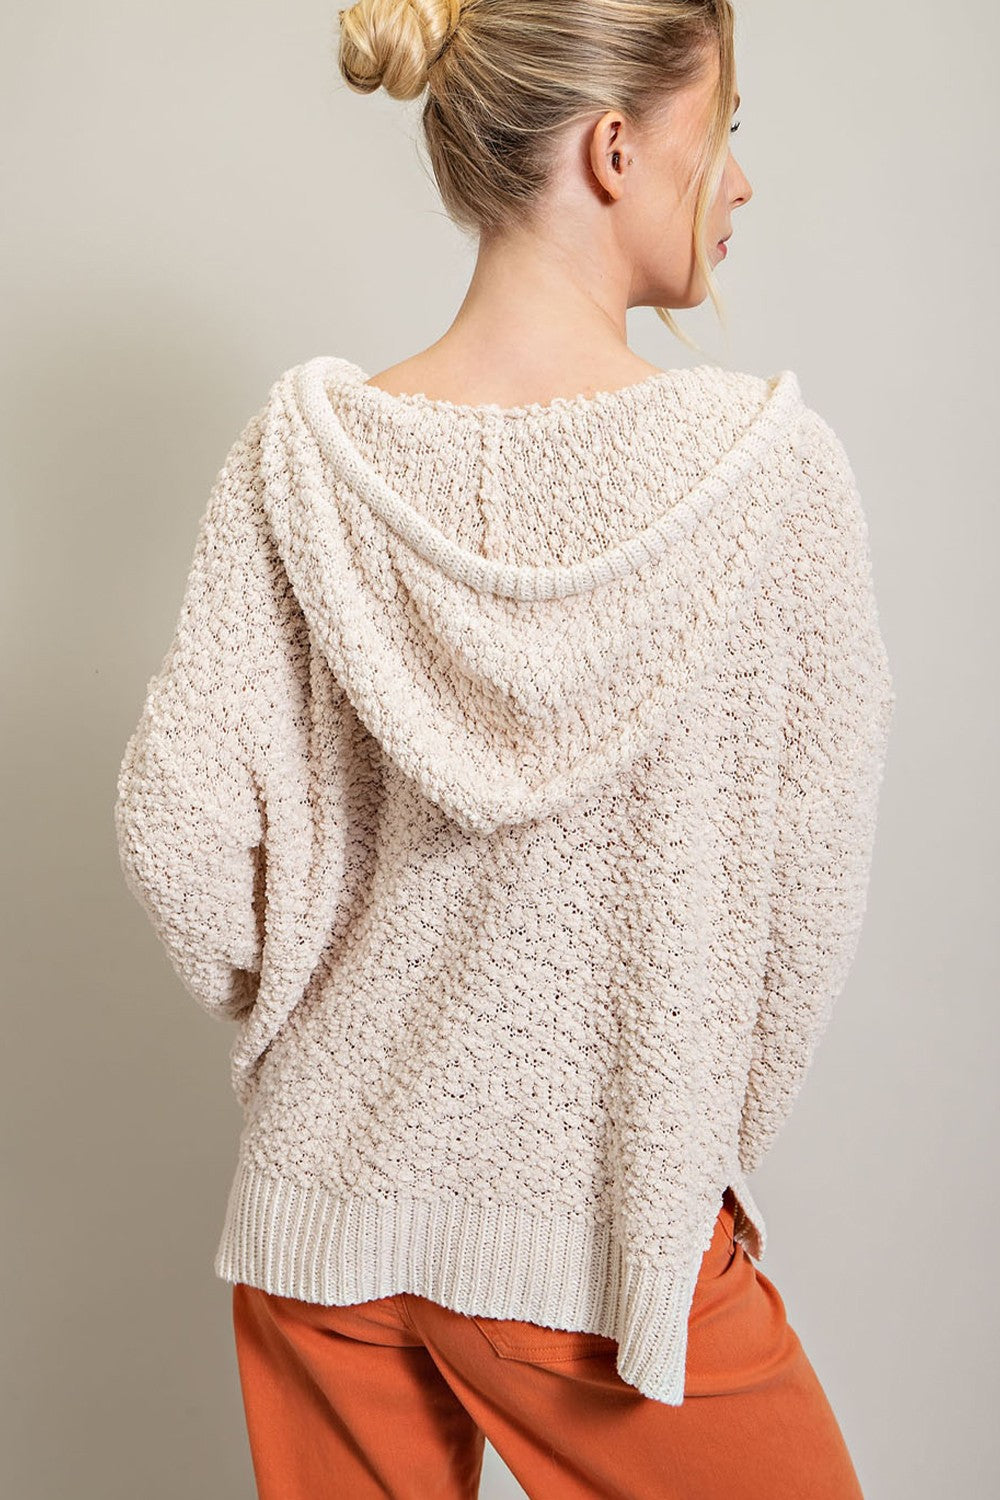 Fluffy Comfy Sweater